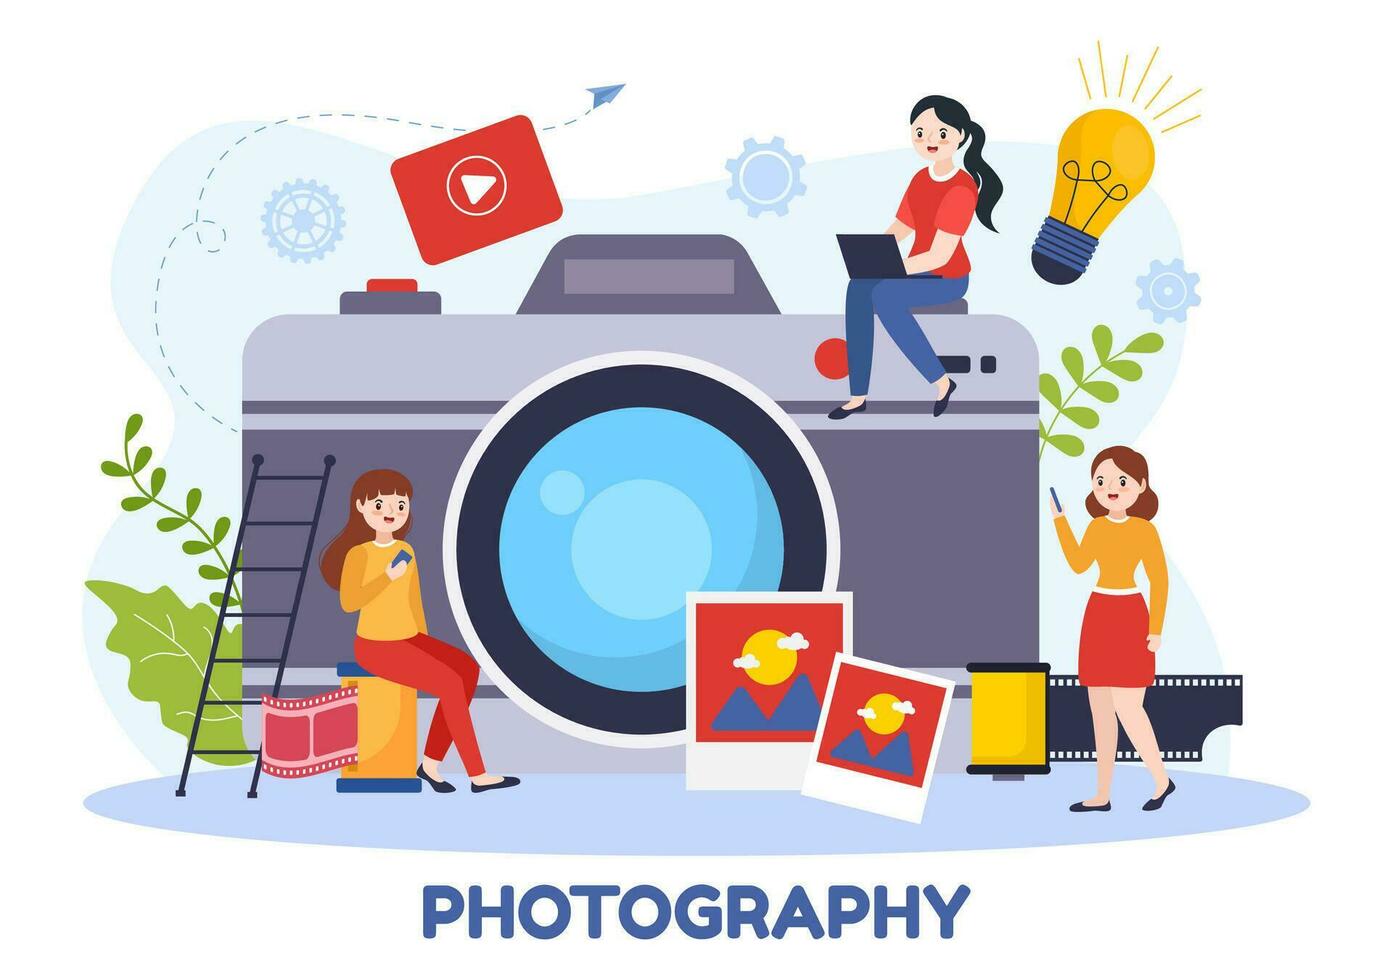 Photography Vector Illustration with Camera and Equipment to Capture Travel, Tourism, Adventure and Memories in a Flat Cartoon Background Design